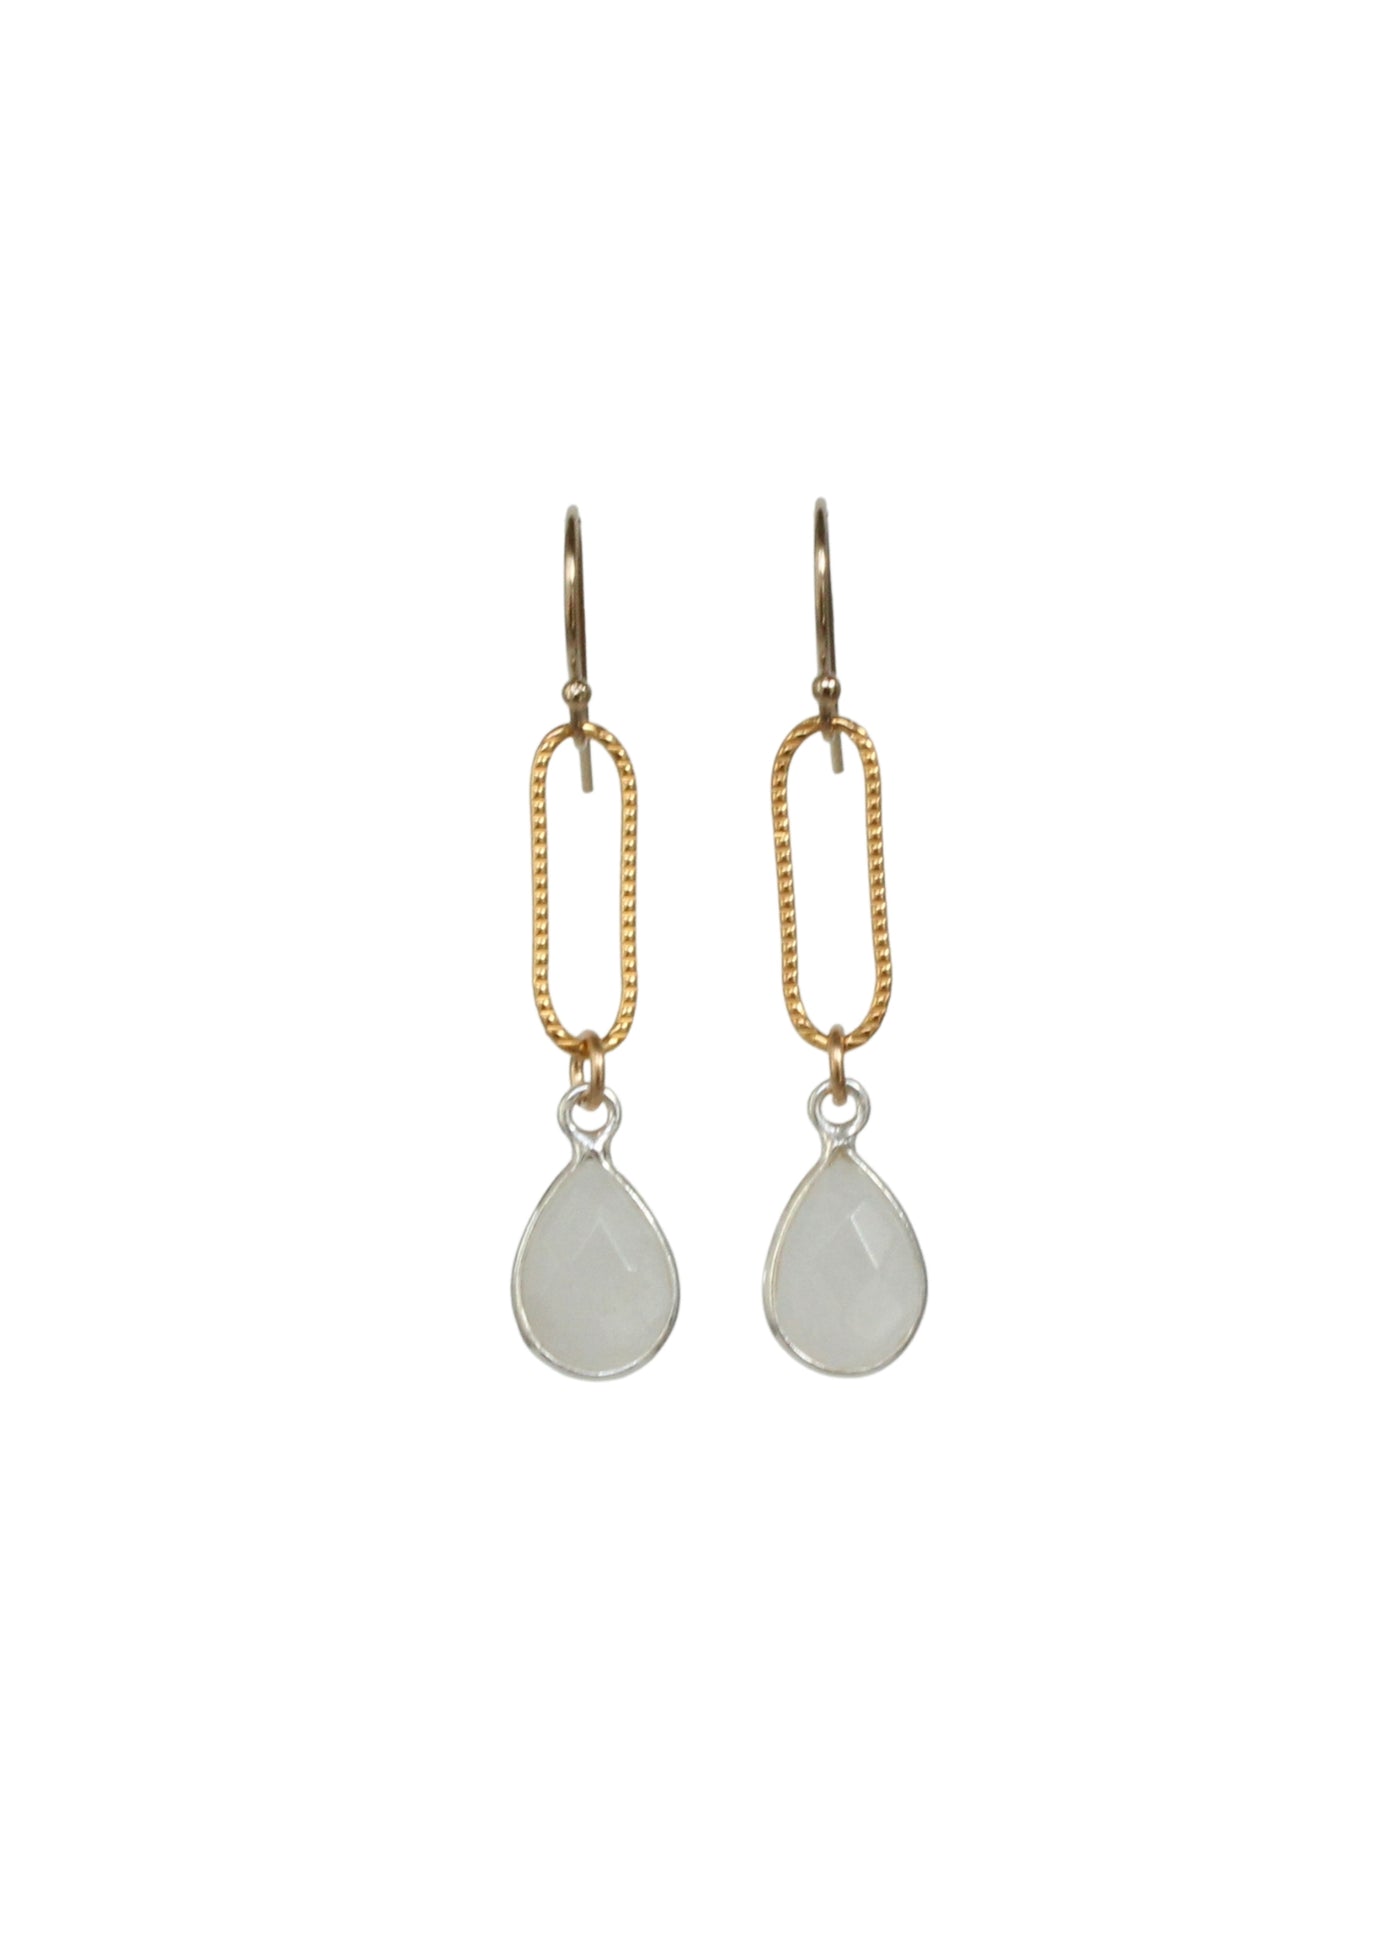 Gold Box Link Drop Earrings with Moonstone